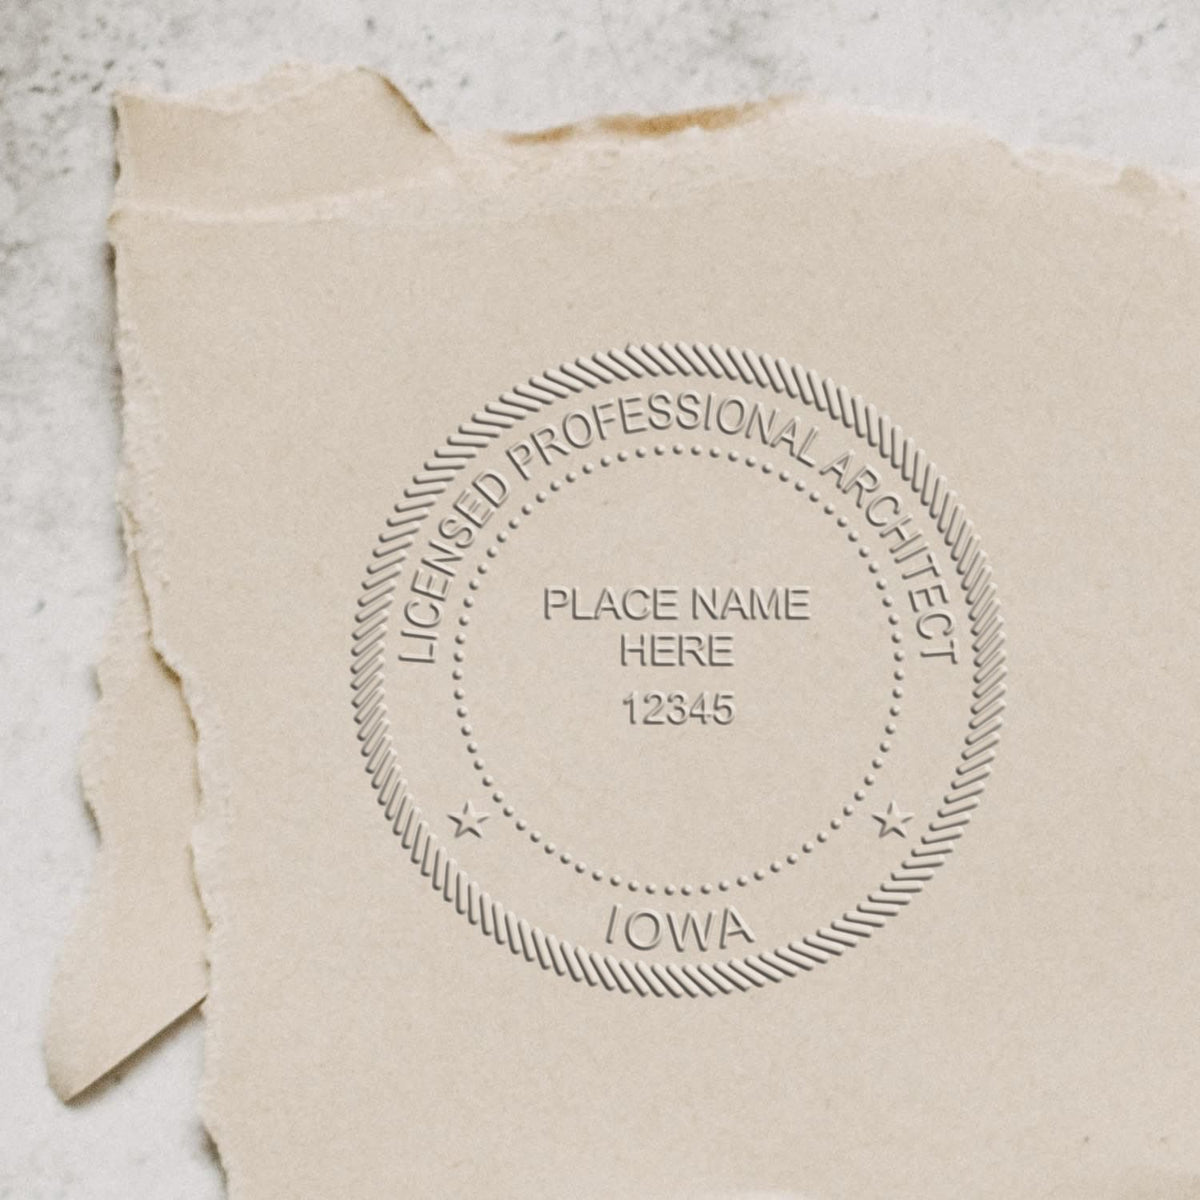 A lifestyle photo showing a stamped image of the Iowa Desk Architect Embossing Seal on a piece of paper